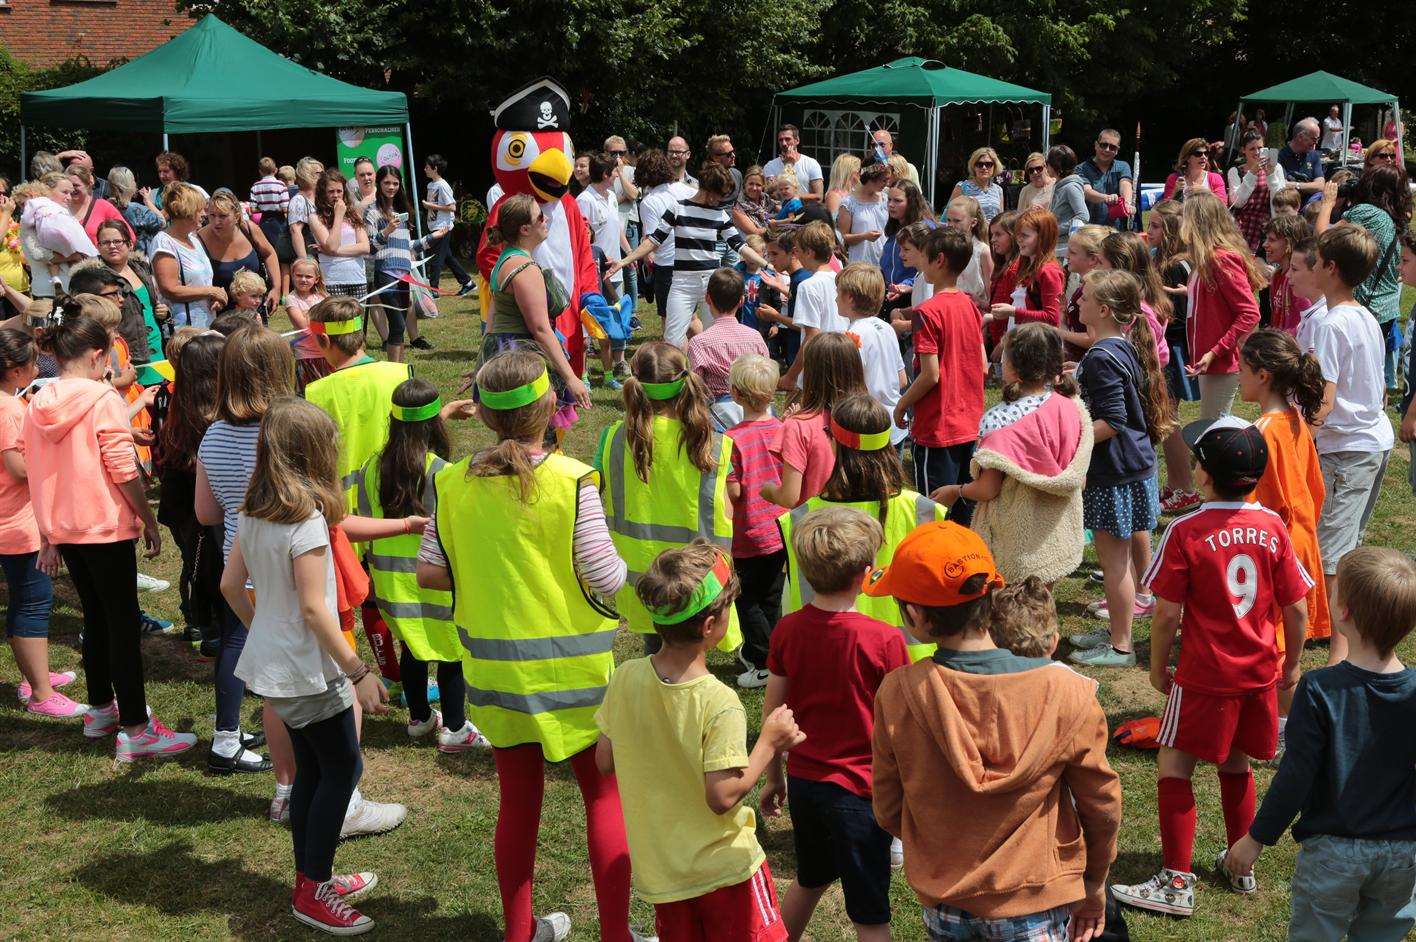 There was a carnival atmosphere at the fete